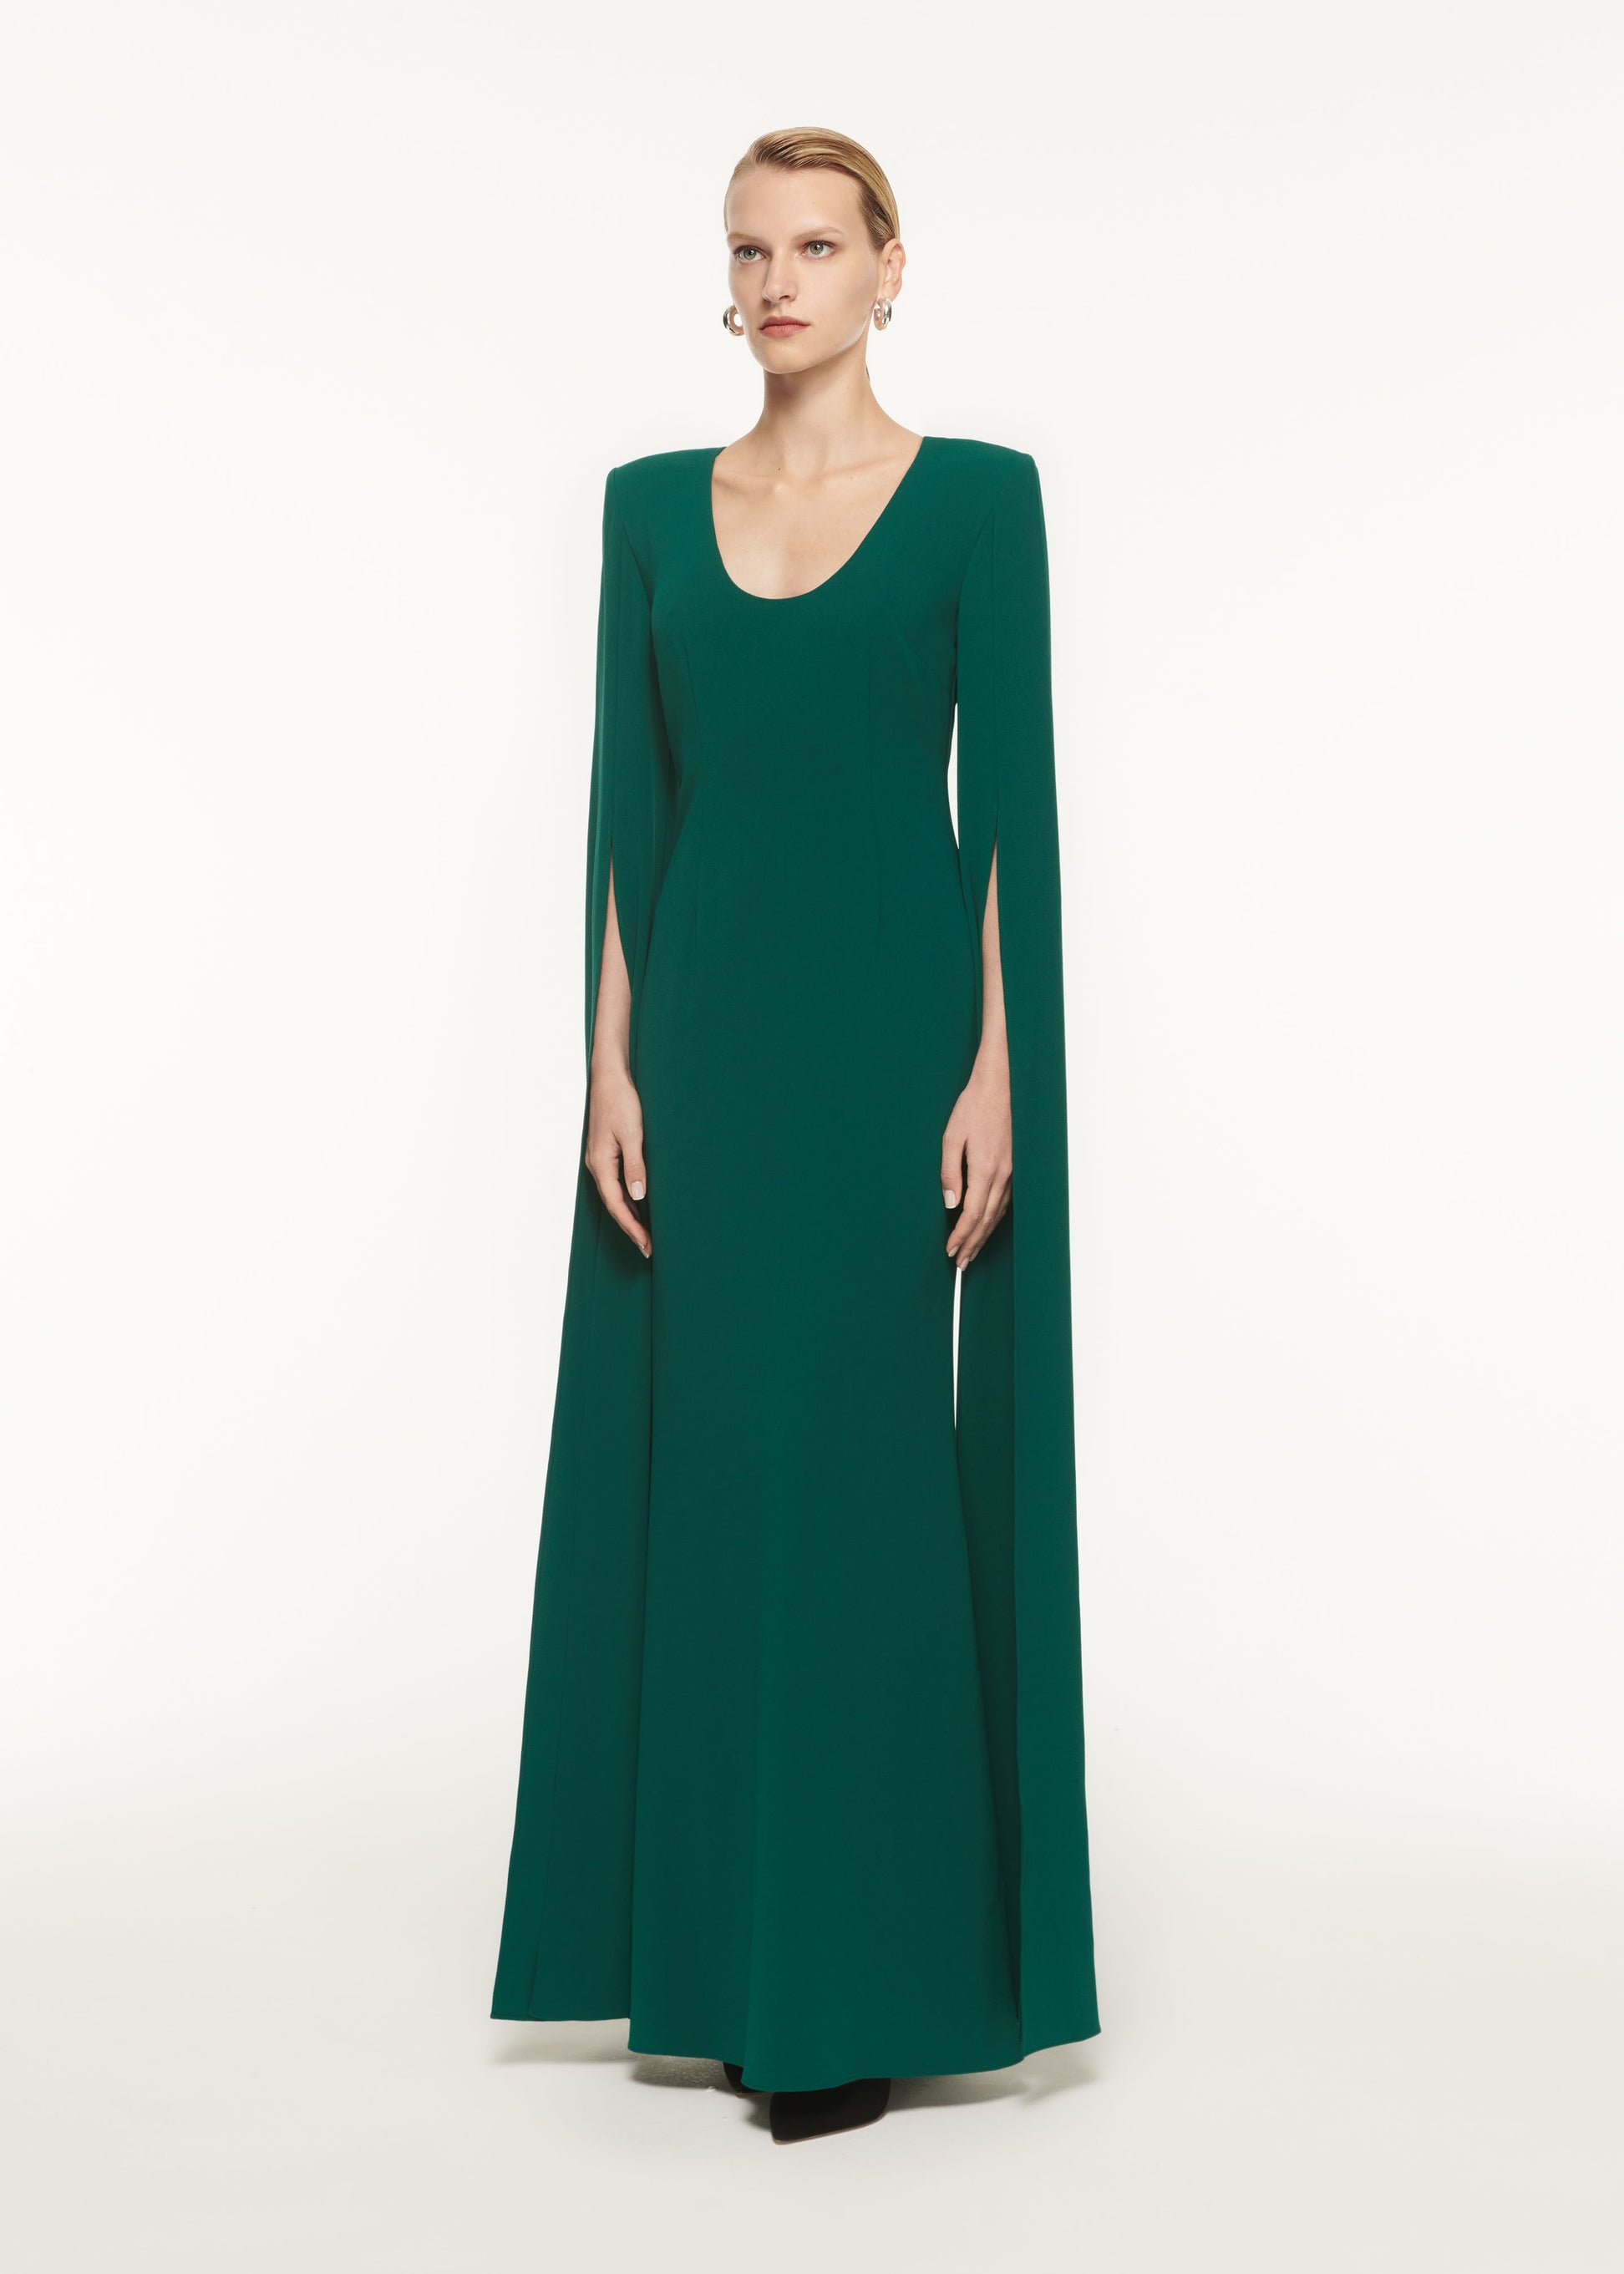 A woman wearing the Cape Sleeve Stretch Cady Maxi Dress